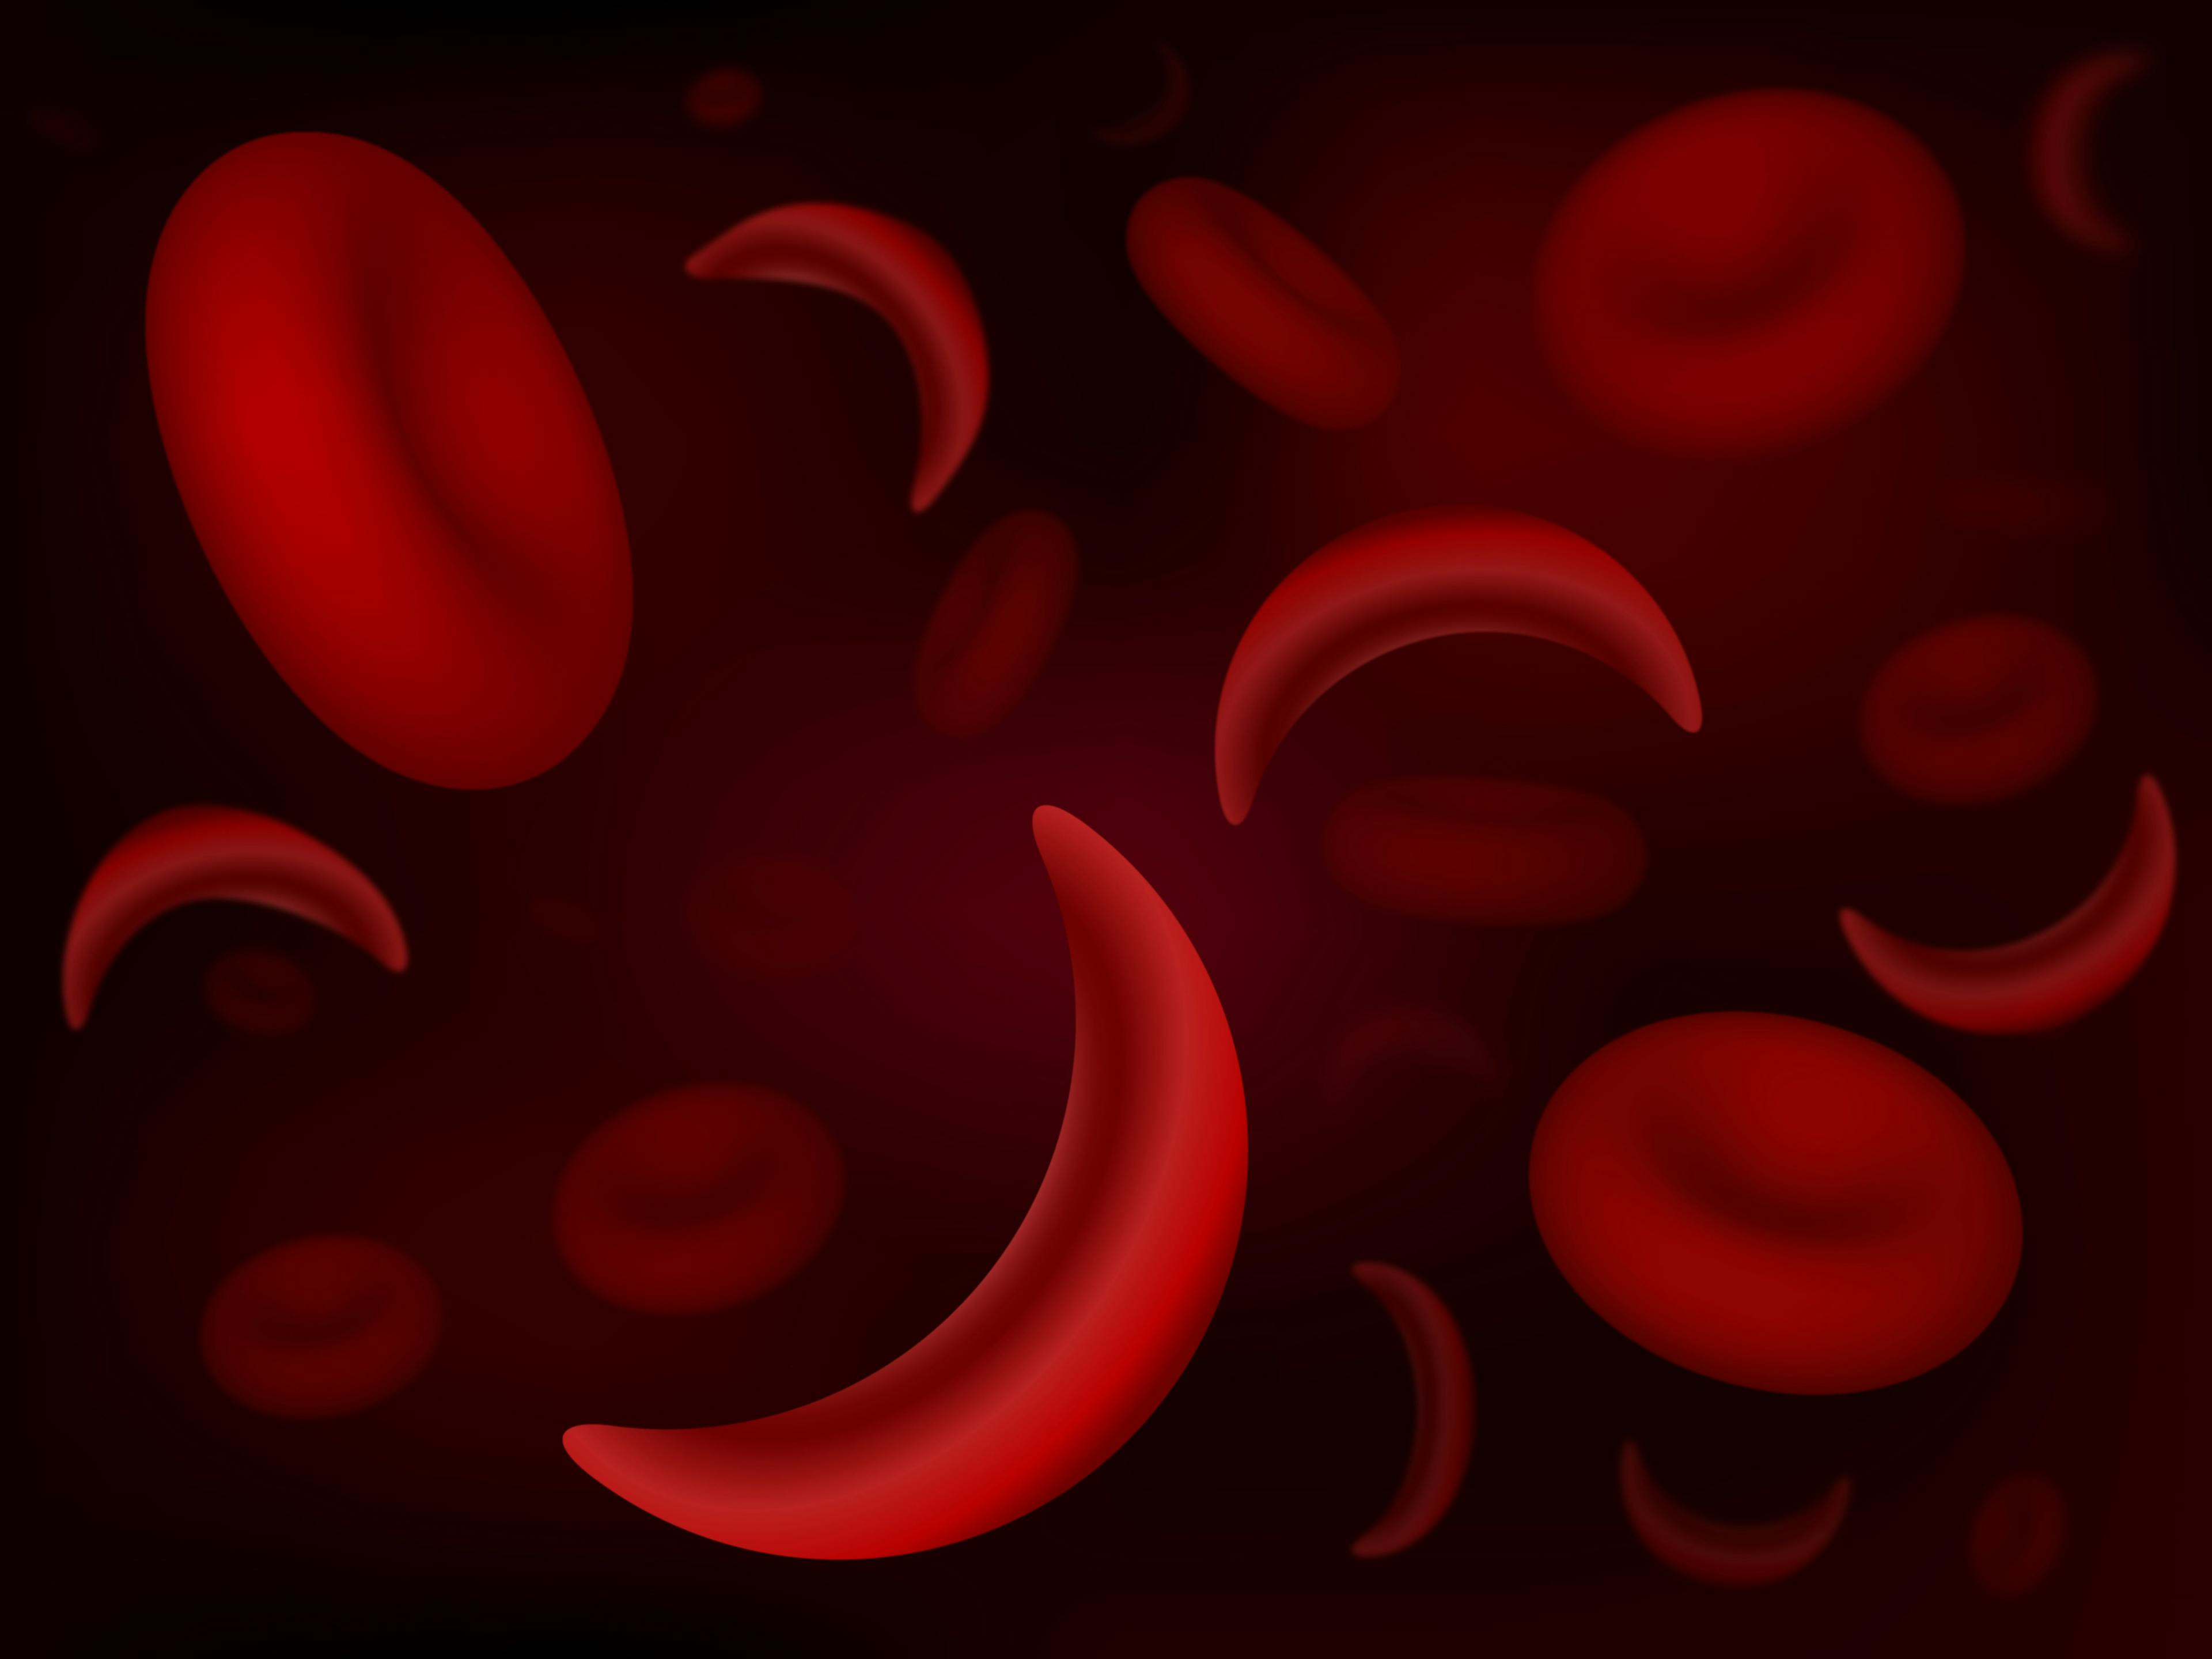 Sickle-cell and normal red blood cells | Image credit: extender_01 - stock.adobe.com